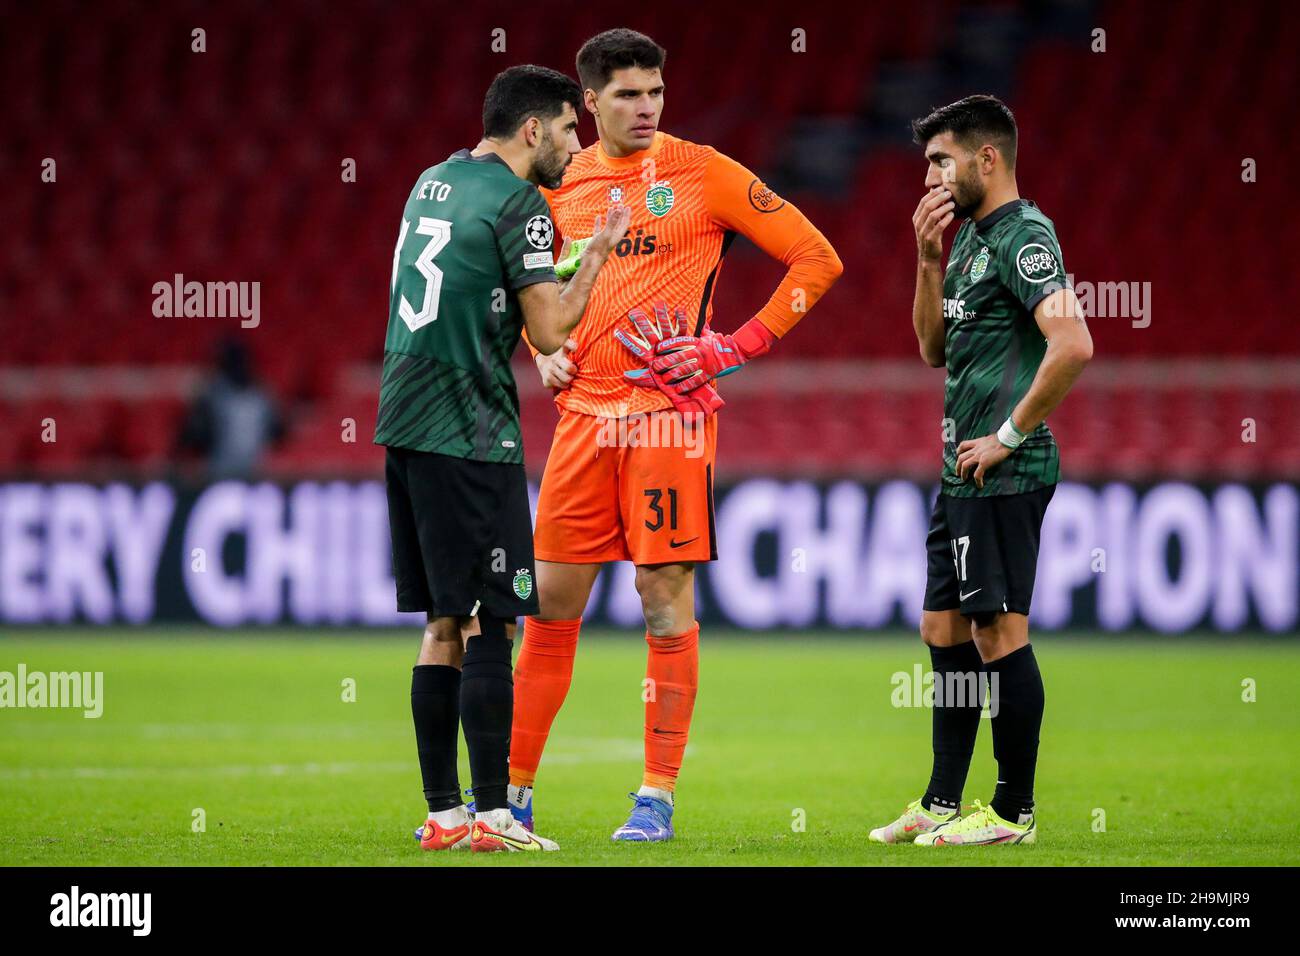 AMSTERDAM, NETHERLANDS - DECEMBER 7: Luis Neto of Sporting CP, Goalkeeper Joao Virginia of Sporting CP and Ricardo Esgaio of Sporting CP during the UEFA Champions League match between Ajax and Sporting Clube de Portugal at Johan Cruijff ArenA on December 7, 2021 in Amsterdam, Netherlands (Photo by Peter Lous/Orange Pictures) Stock Photo